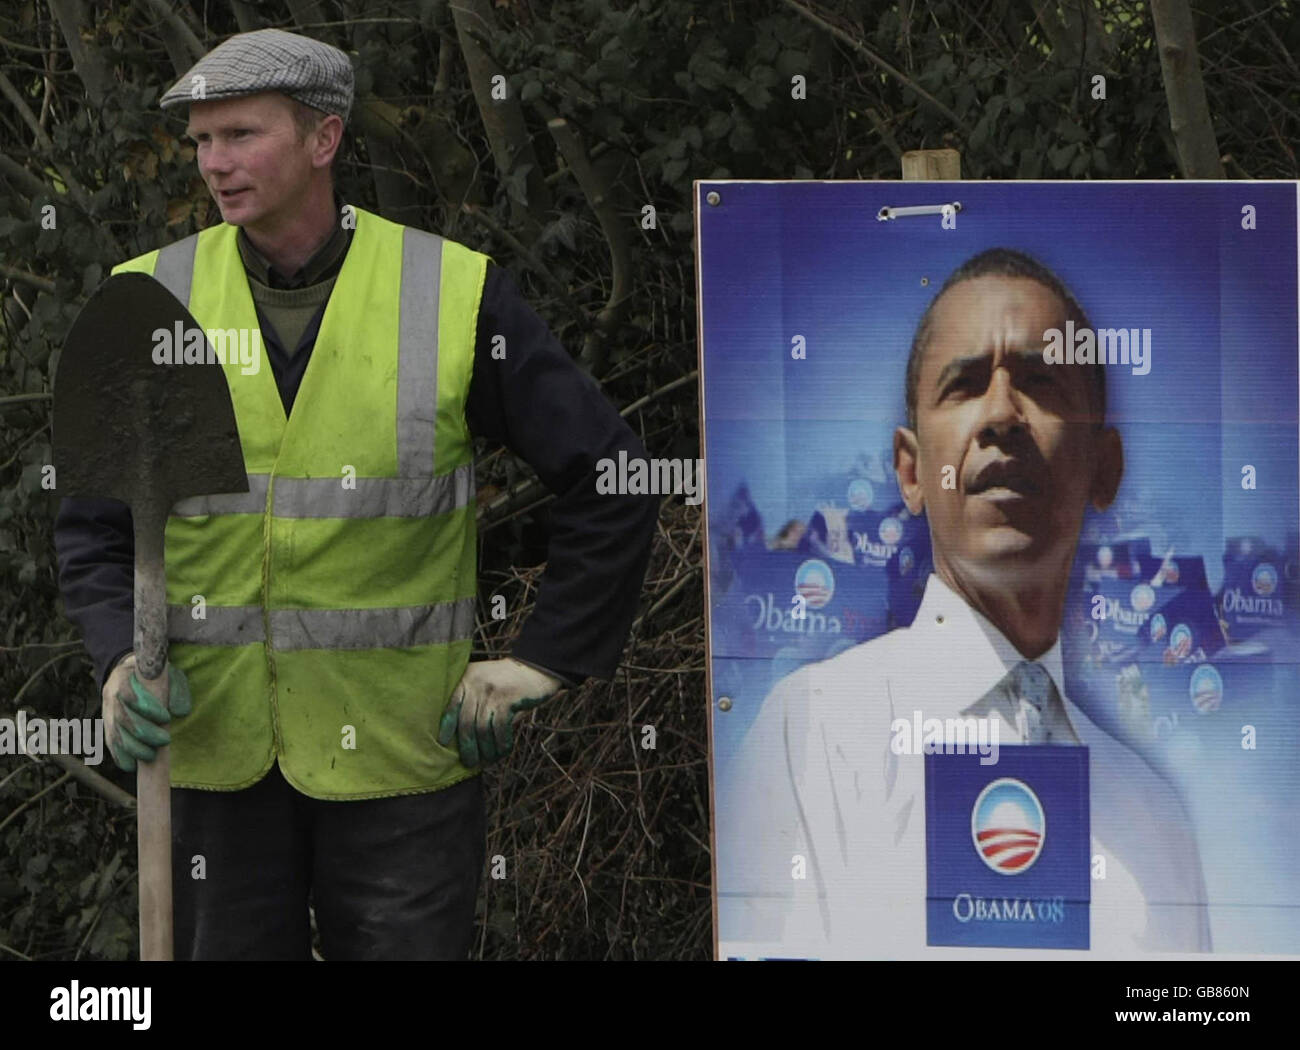 A council worker stands next to a sign of U.S presidential hopeful Barack Obama, in the small village of Moneygall, in Co. Offaly, Obama's ancestral home, discovered through church records. Stock Photo